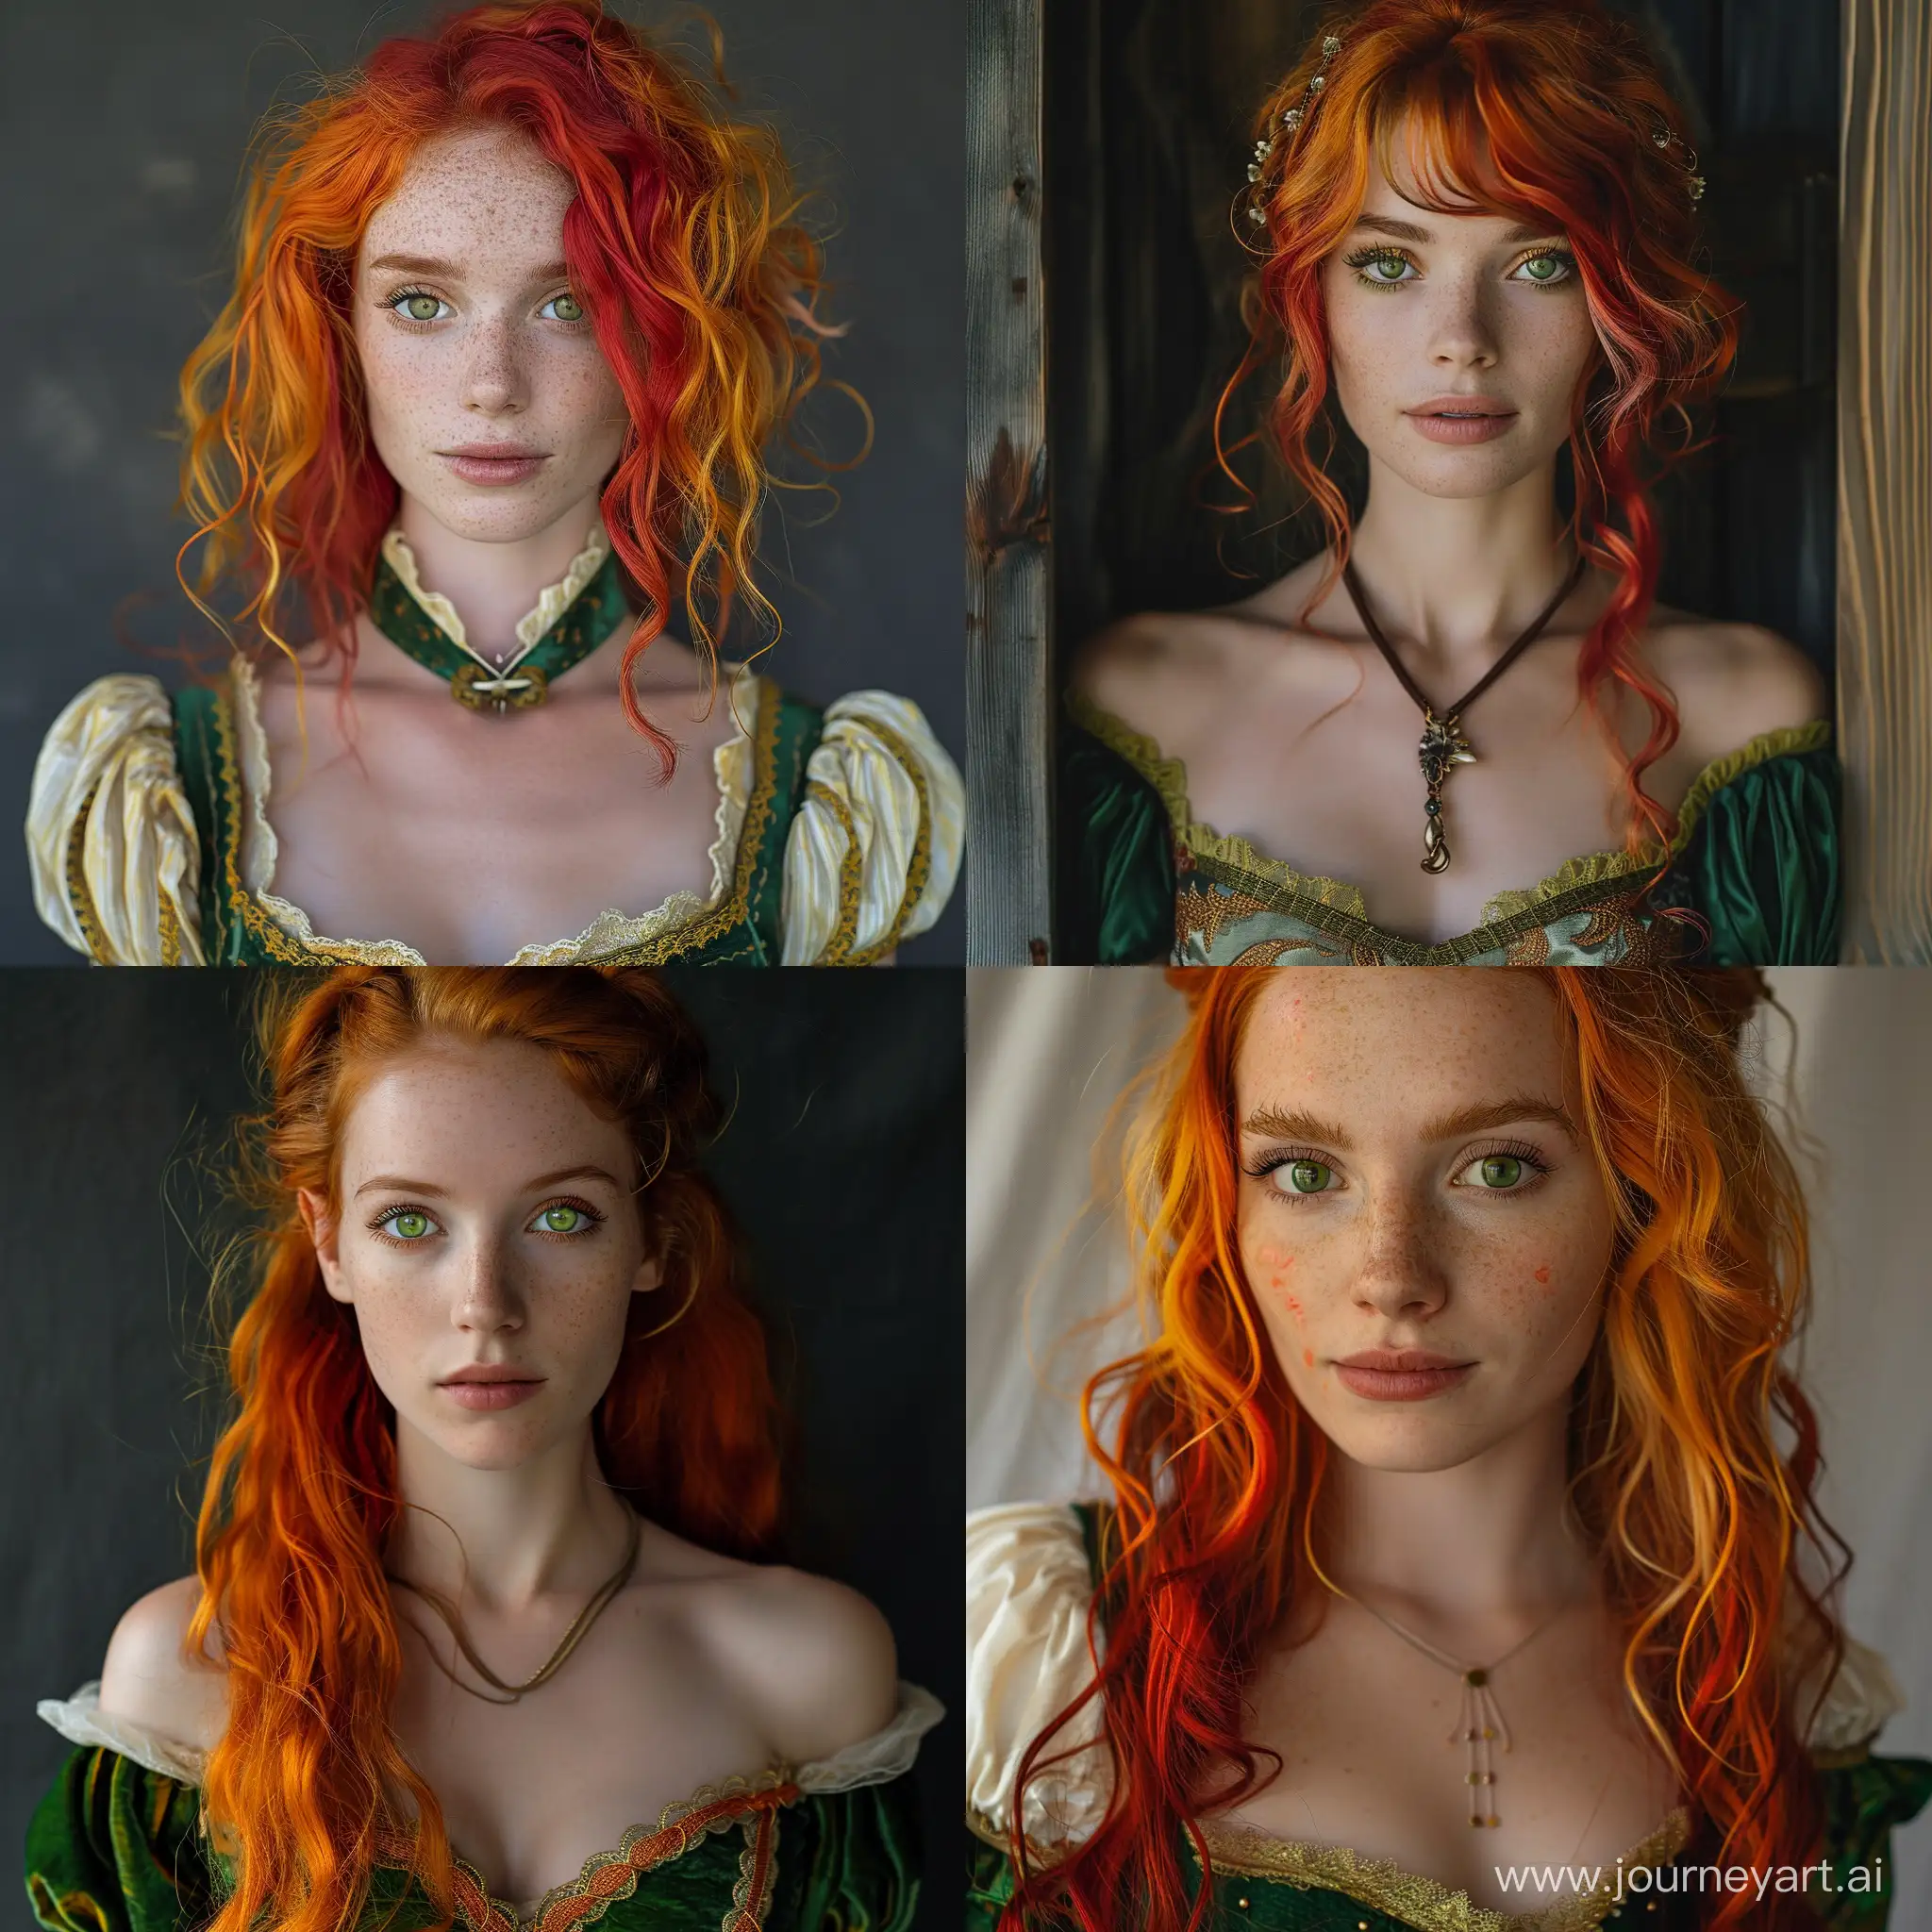 Intellectual-Elf-in-Red-and-Orange-Period-Dress-with-Green-Eyes